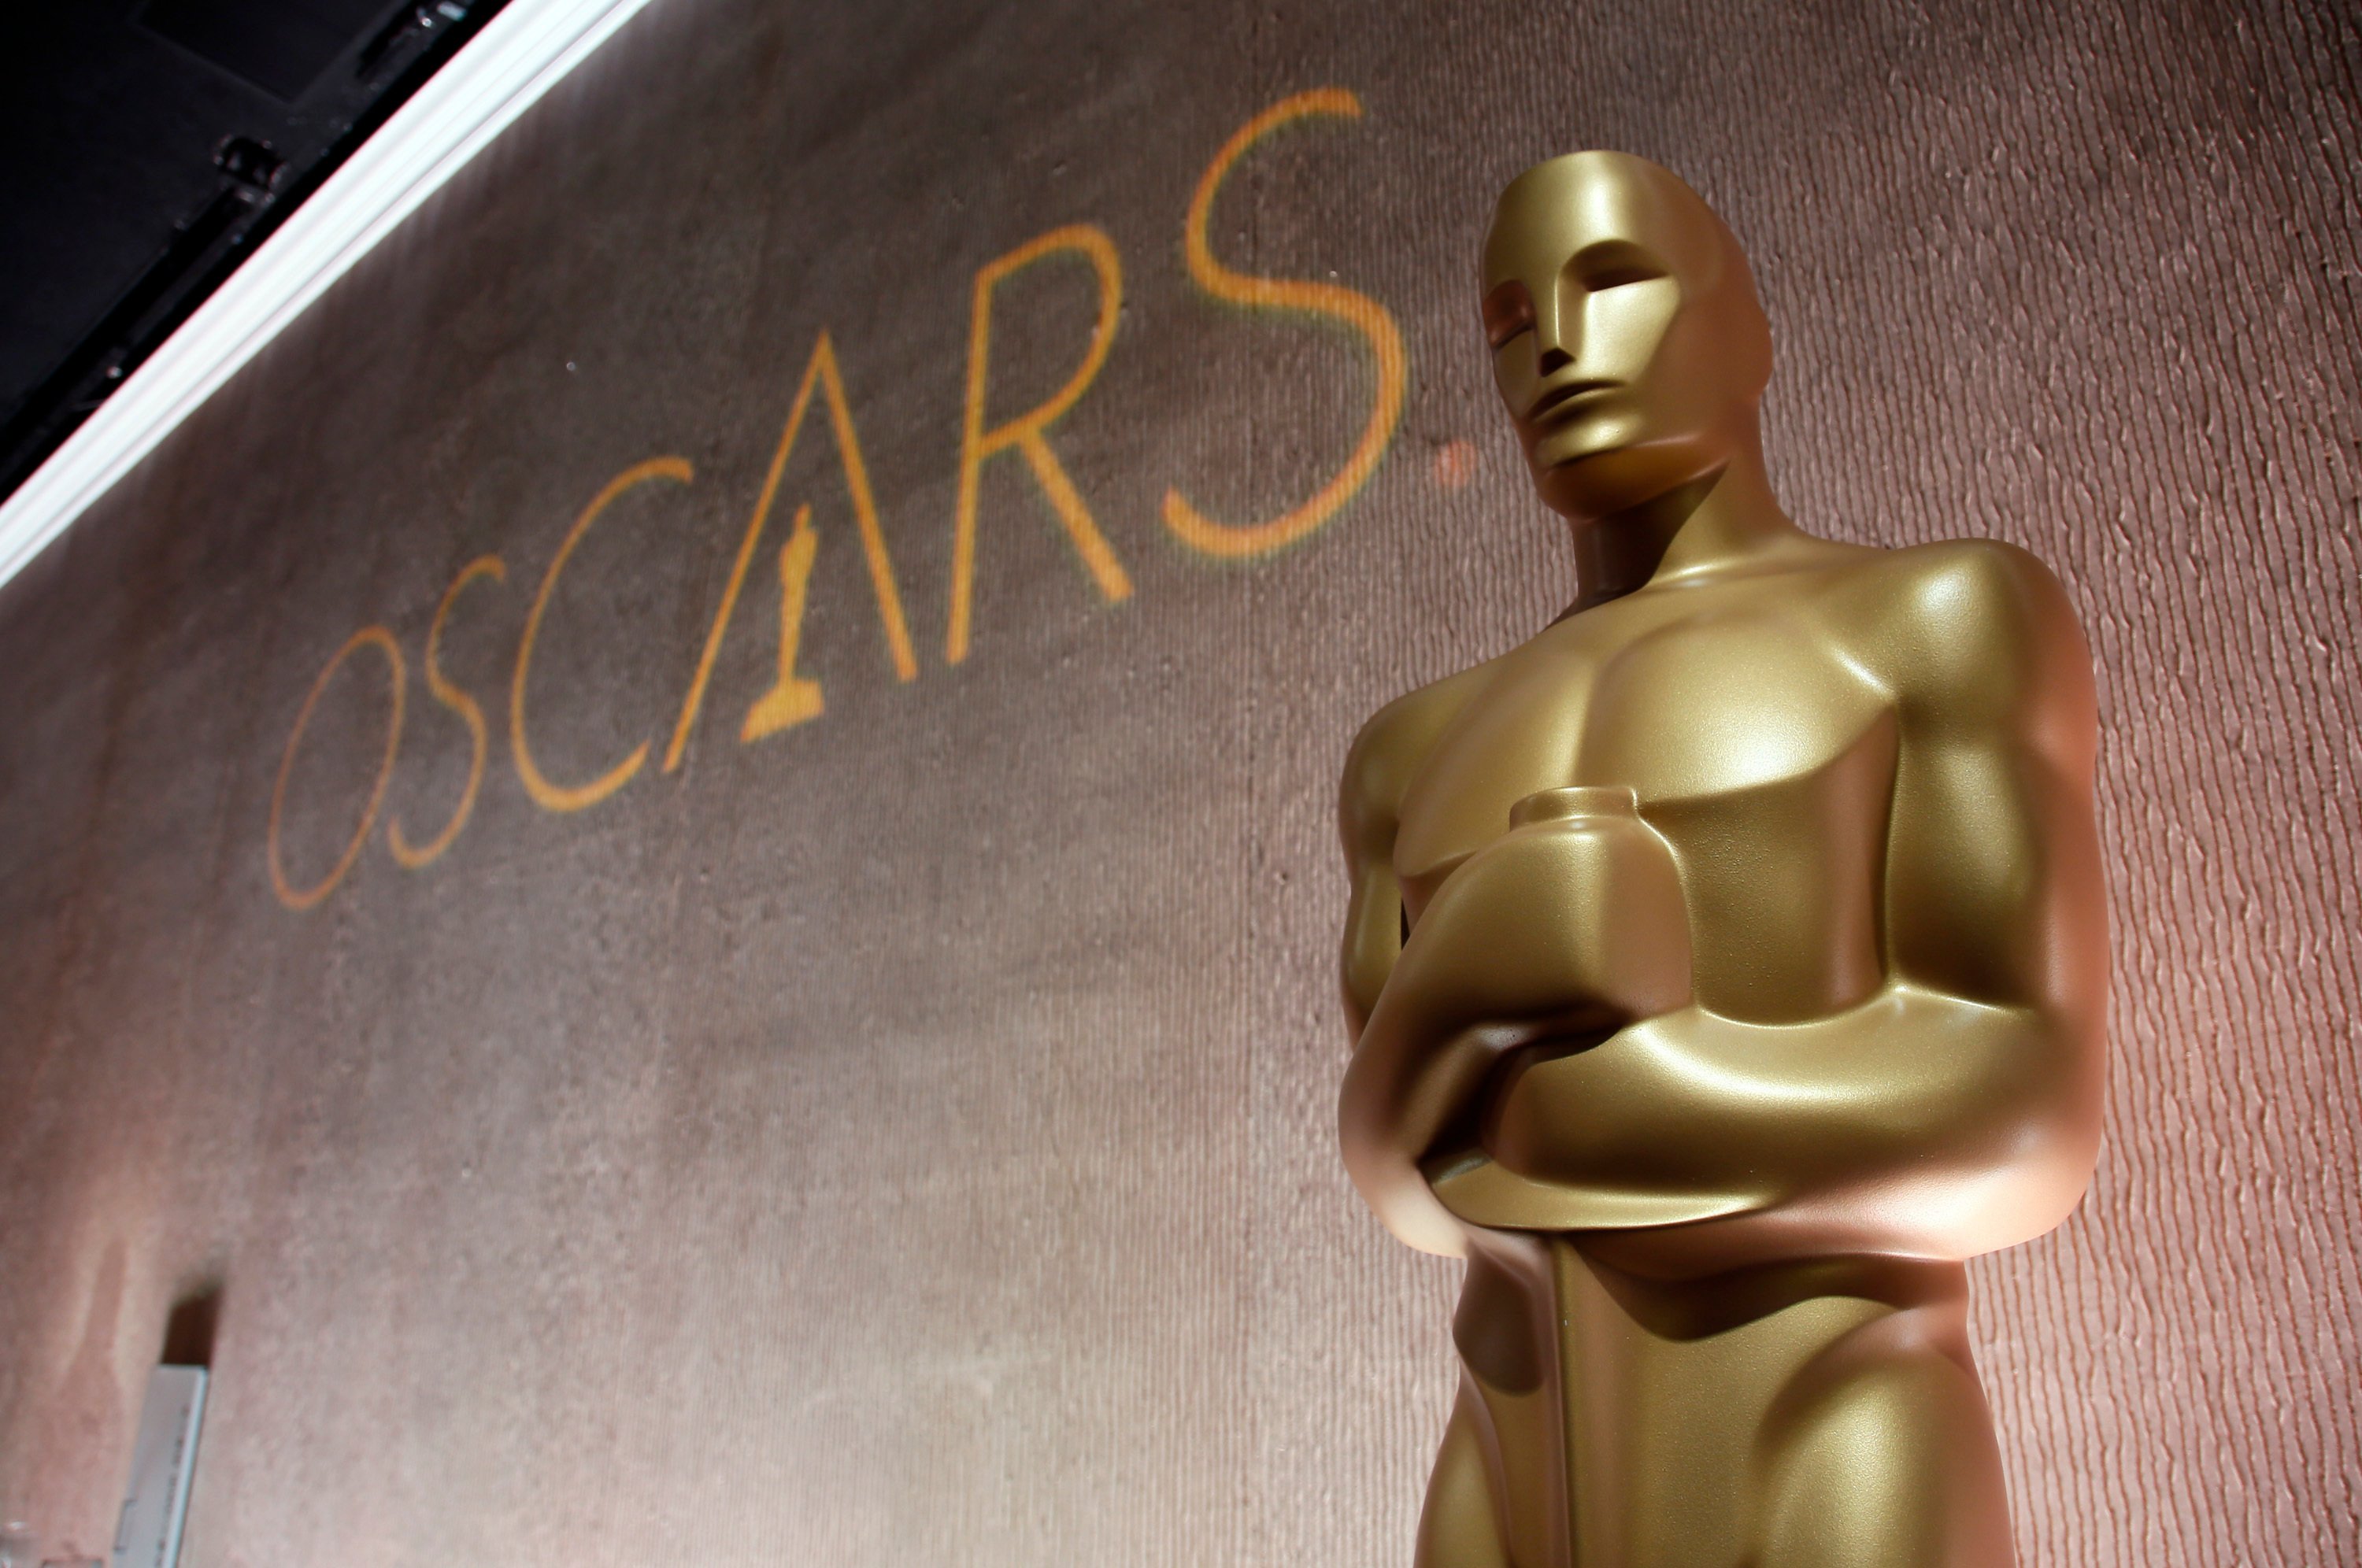 Complete list of nominees for the 93rd Academy Awards